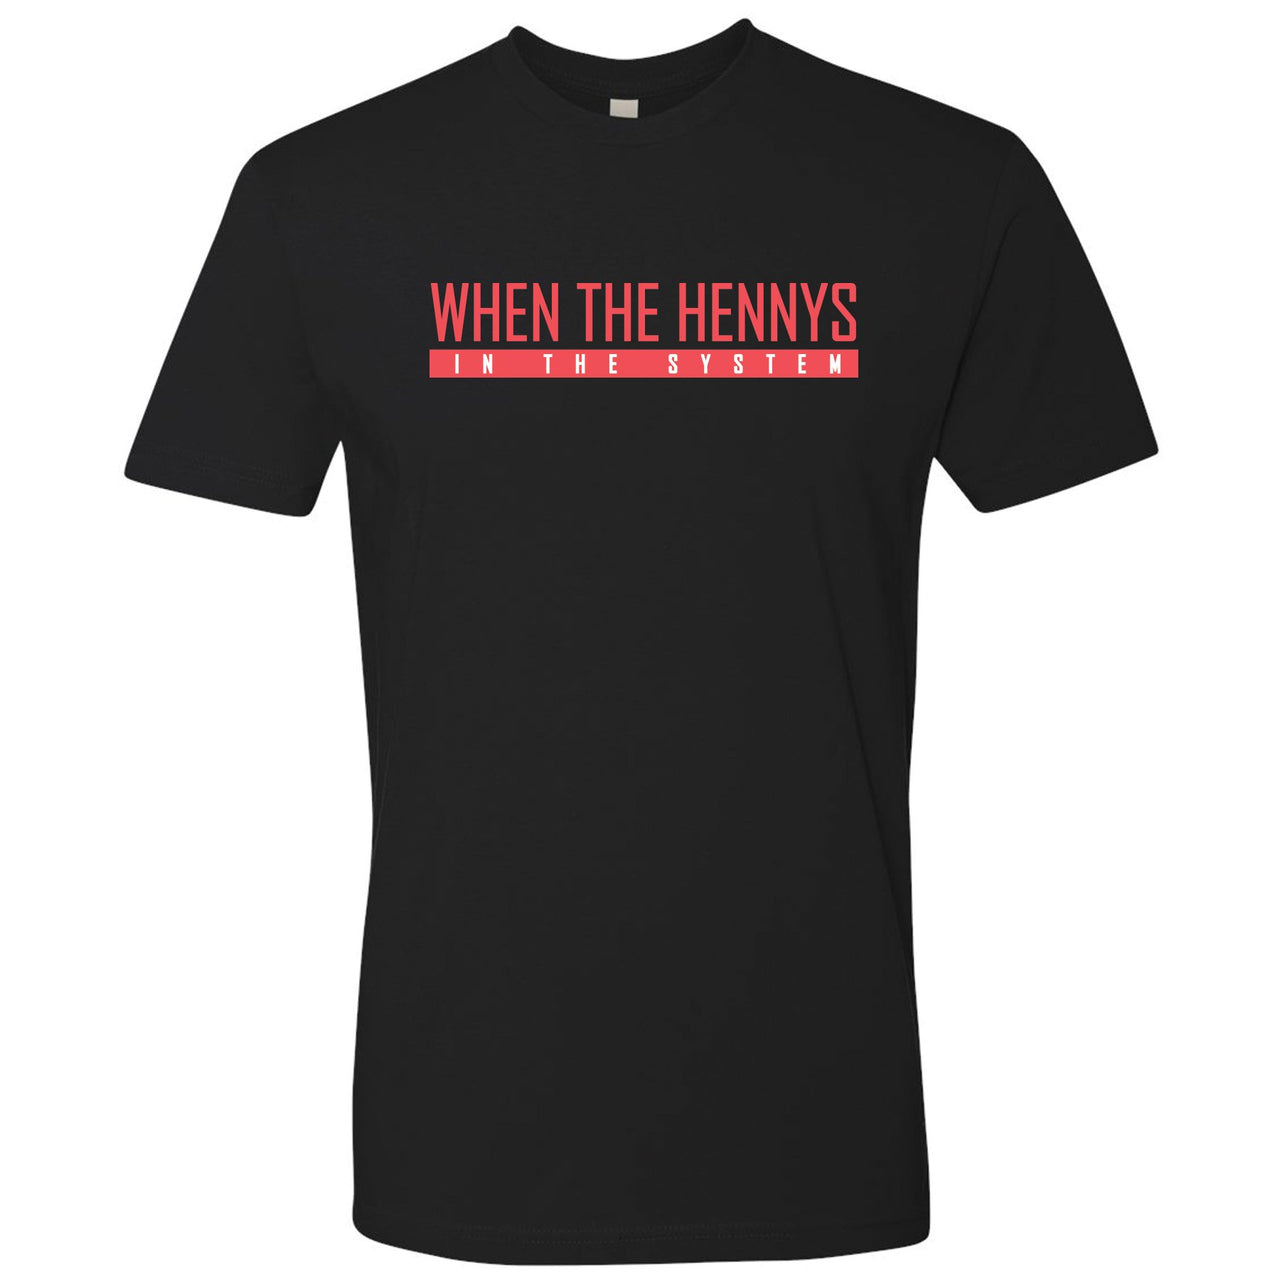 Infrared 6s T Shirt | When The Hennys In The System, Black